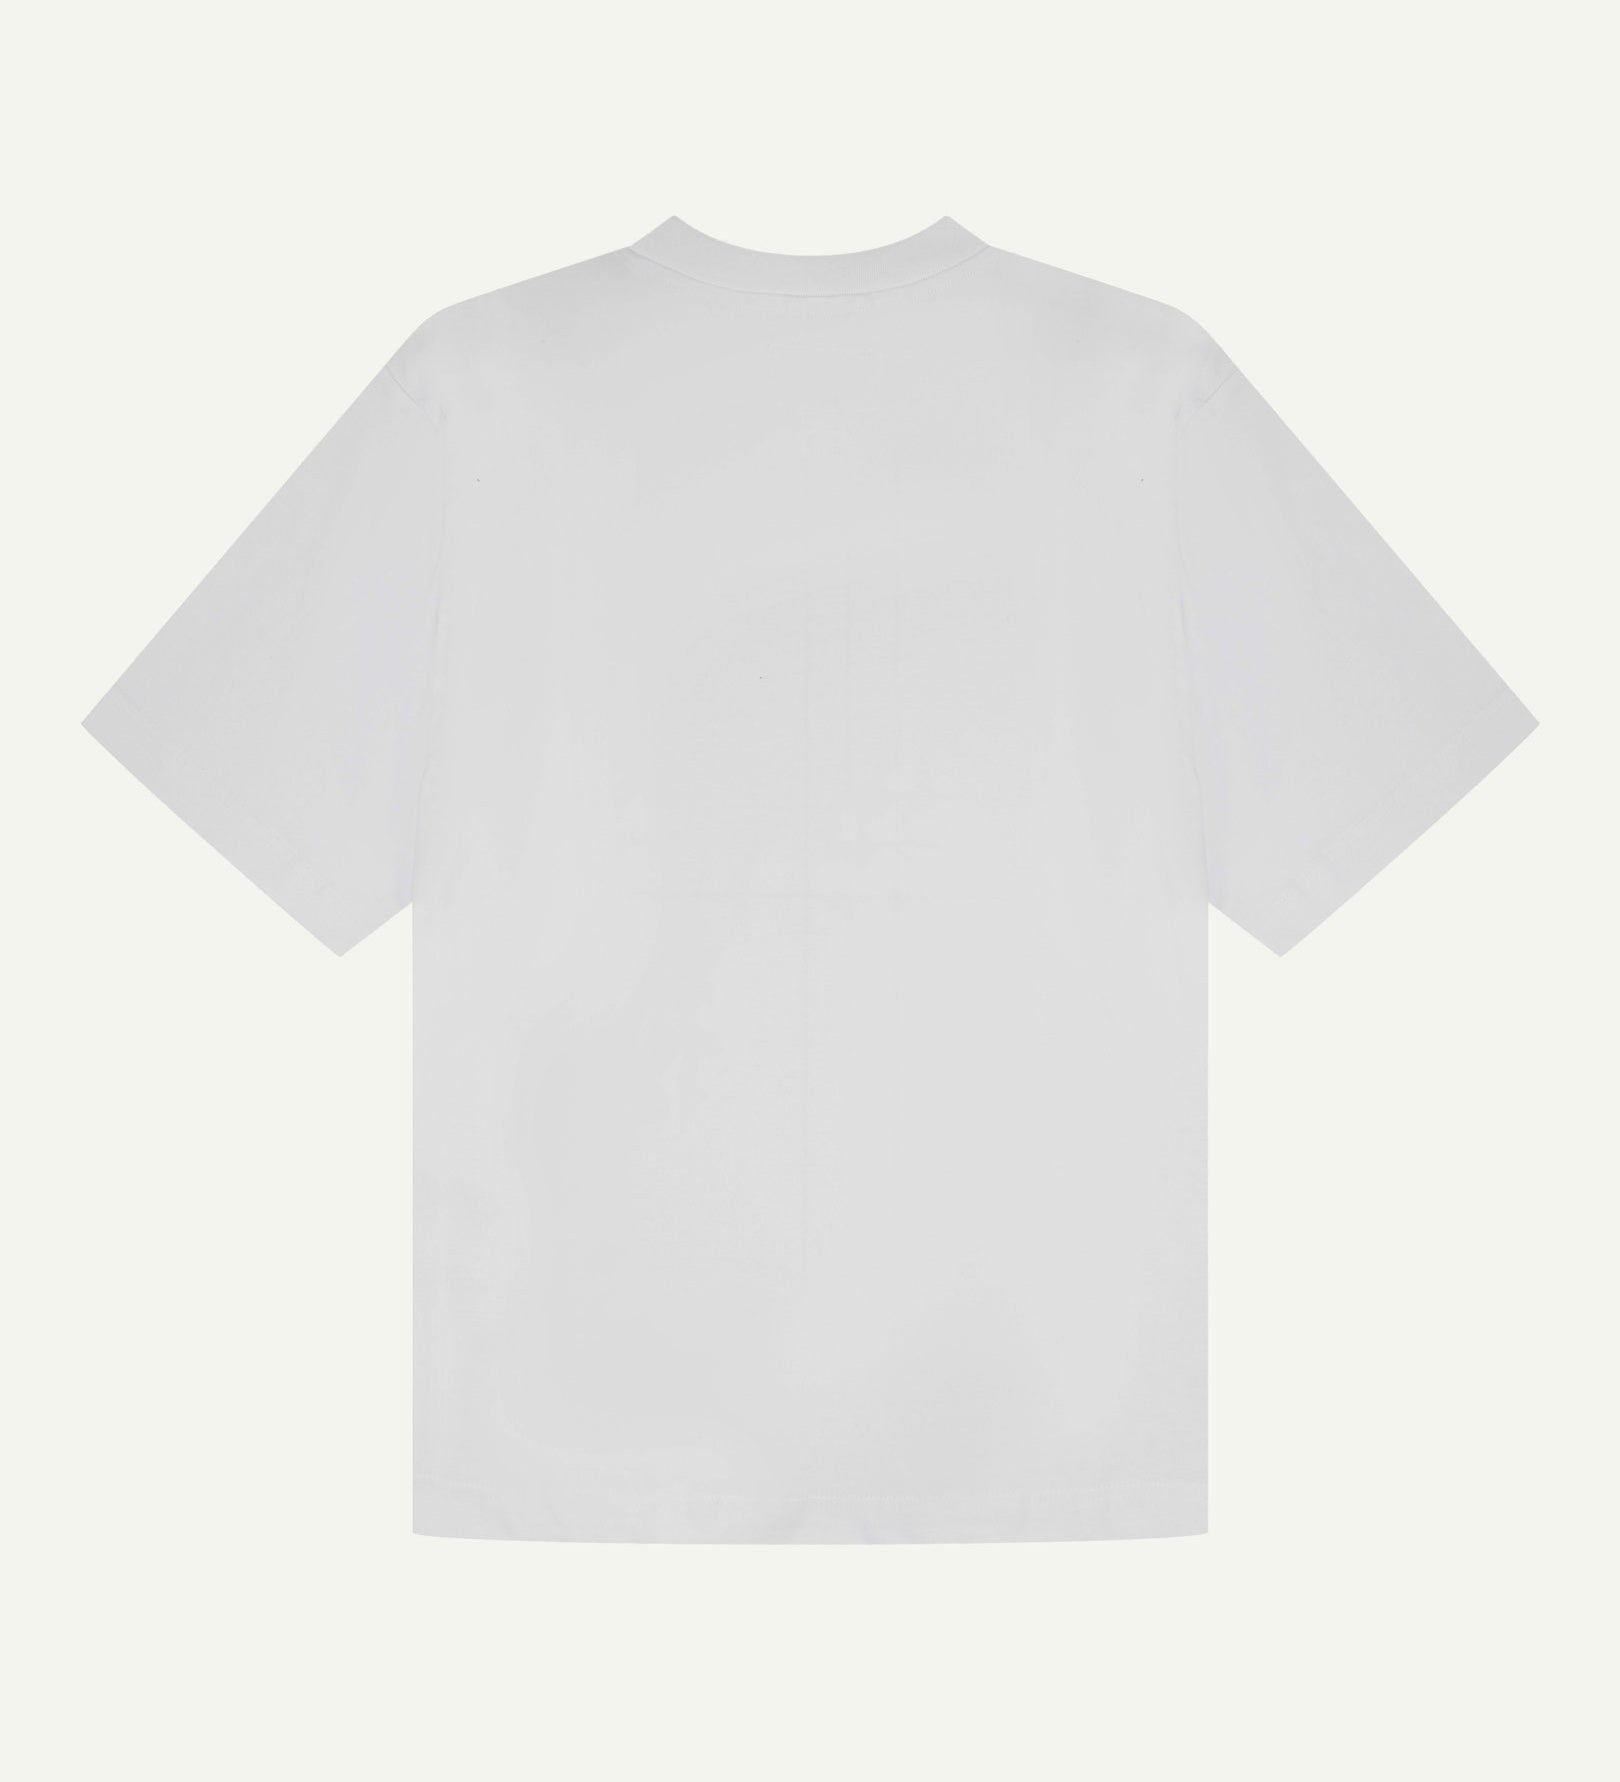 Back view of white, organic cotton short-sleeved oversized T-shirt from Uskees.